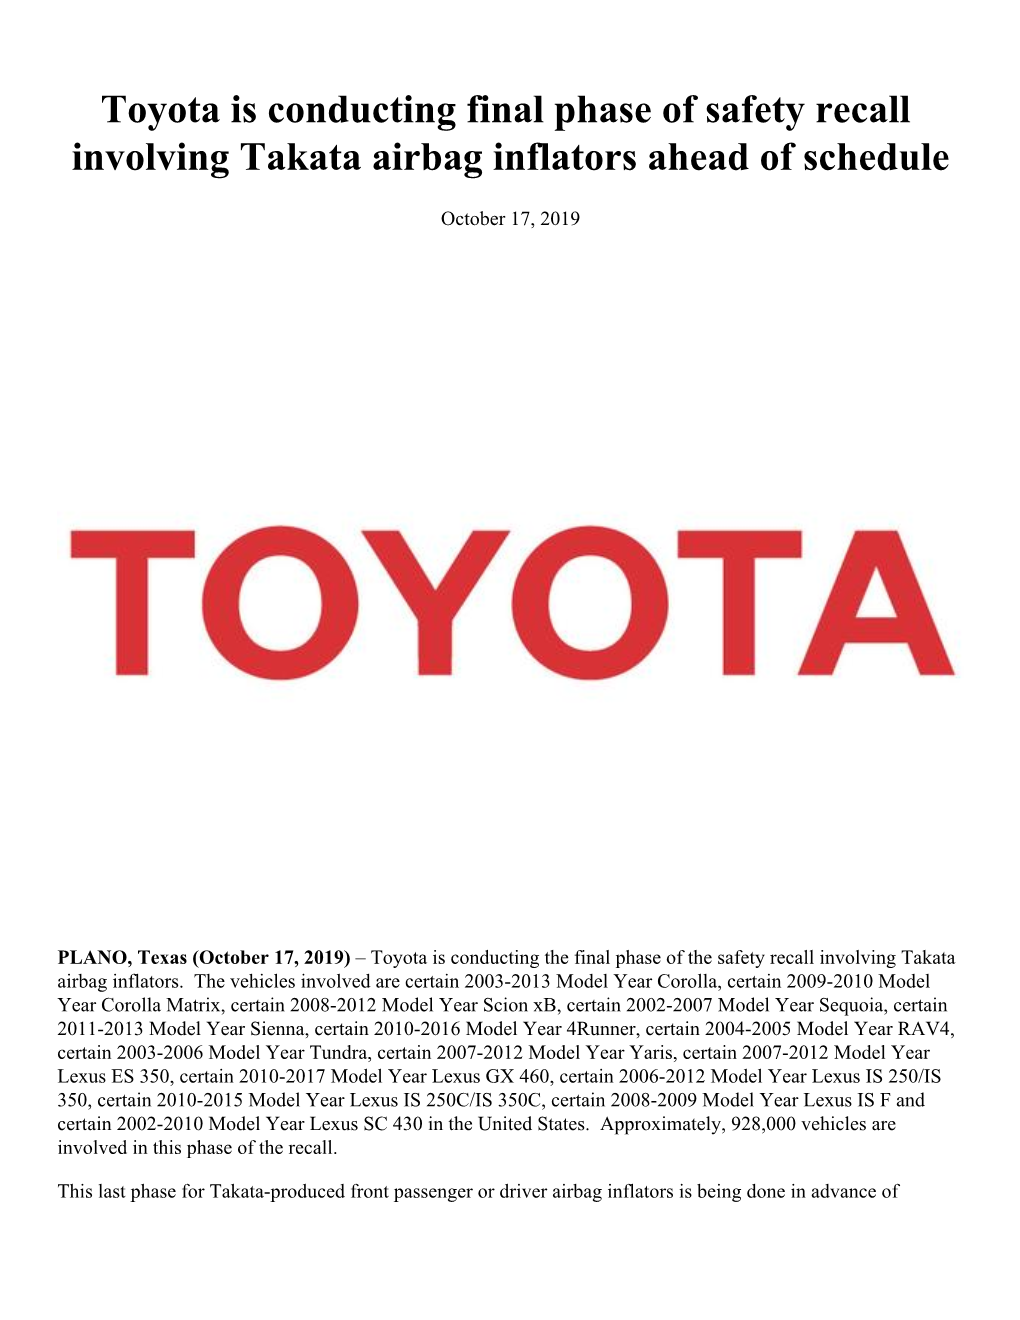 Toyota Is Conducting Final Phase of Safety Recall Involving Takata Airbag Inflators Ahead of Schedule